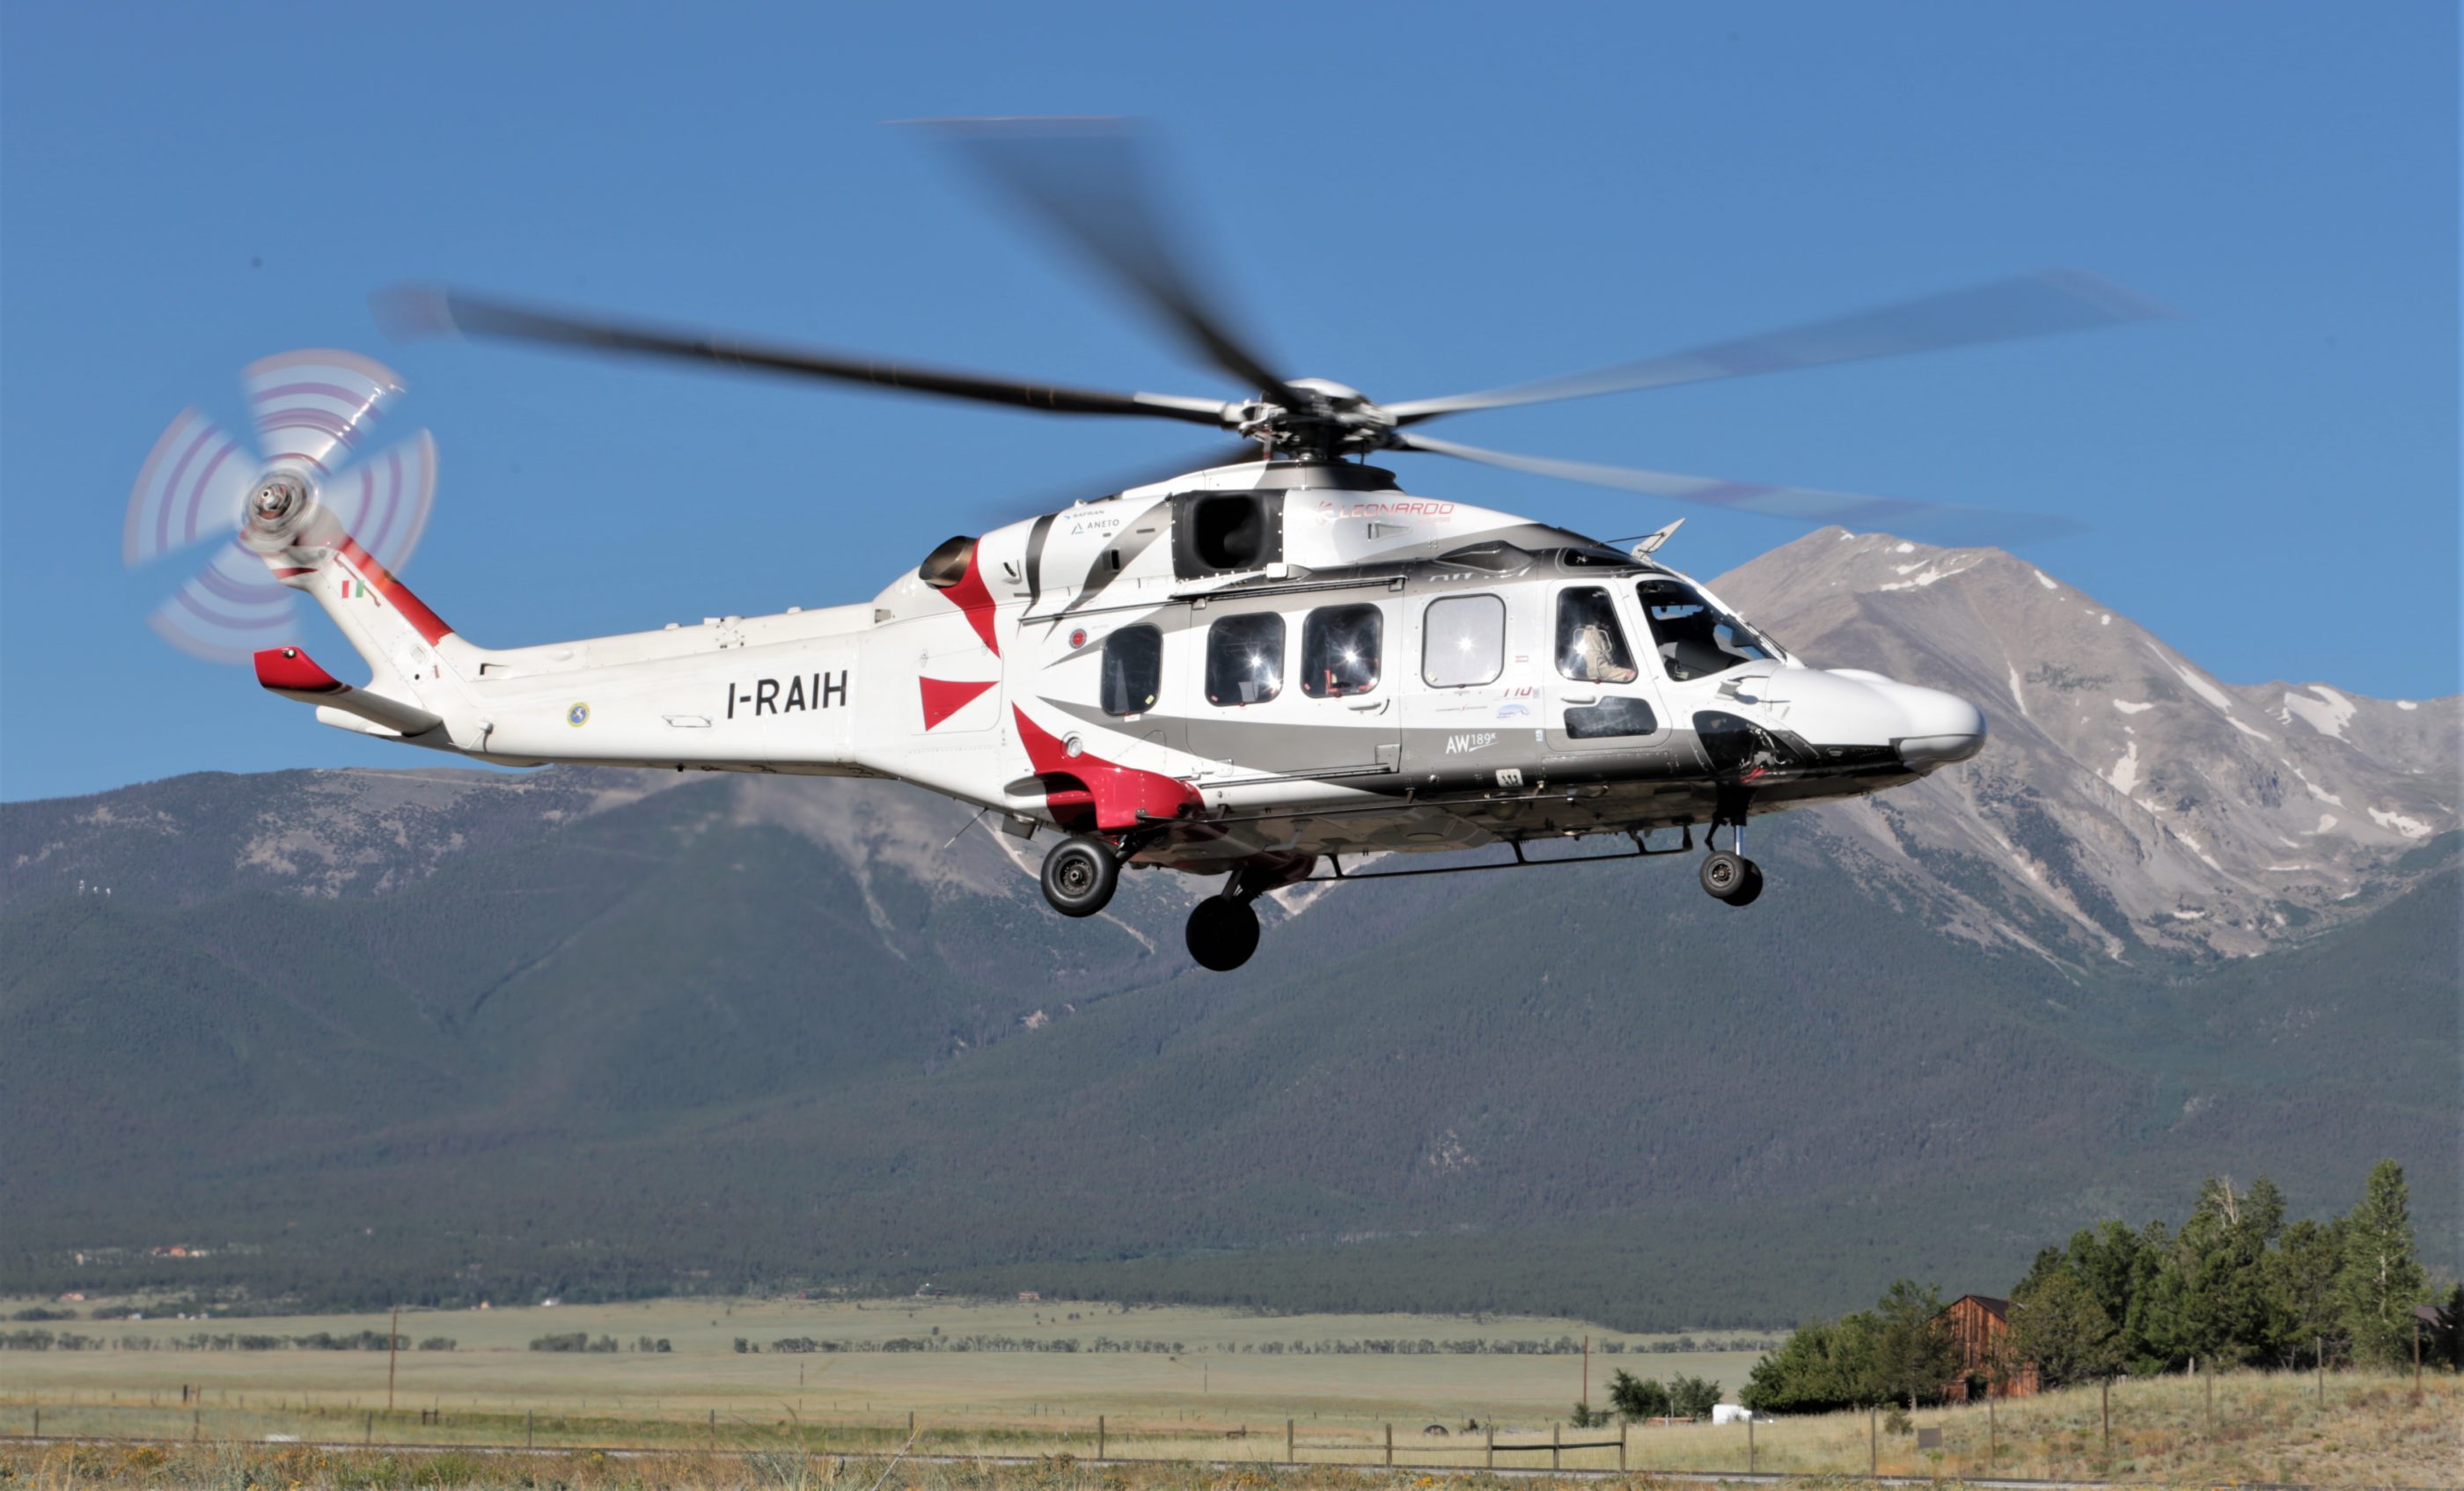 The AW189K is an all new variant of the successful AW189 super medium helicopter, with modern Safran Helicopter Engines Aneto-1K, to offer high performance across geographies and for various roles. Leonardo Photo